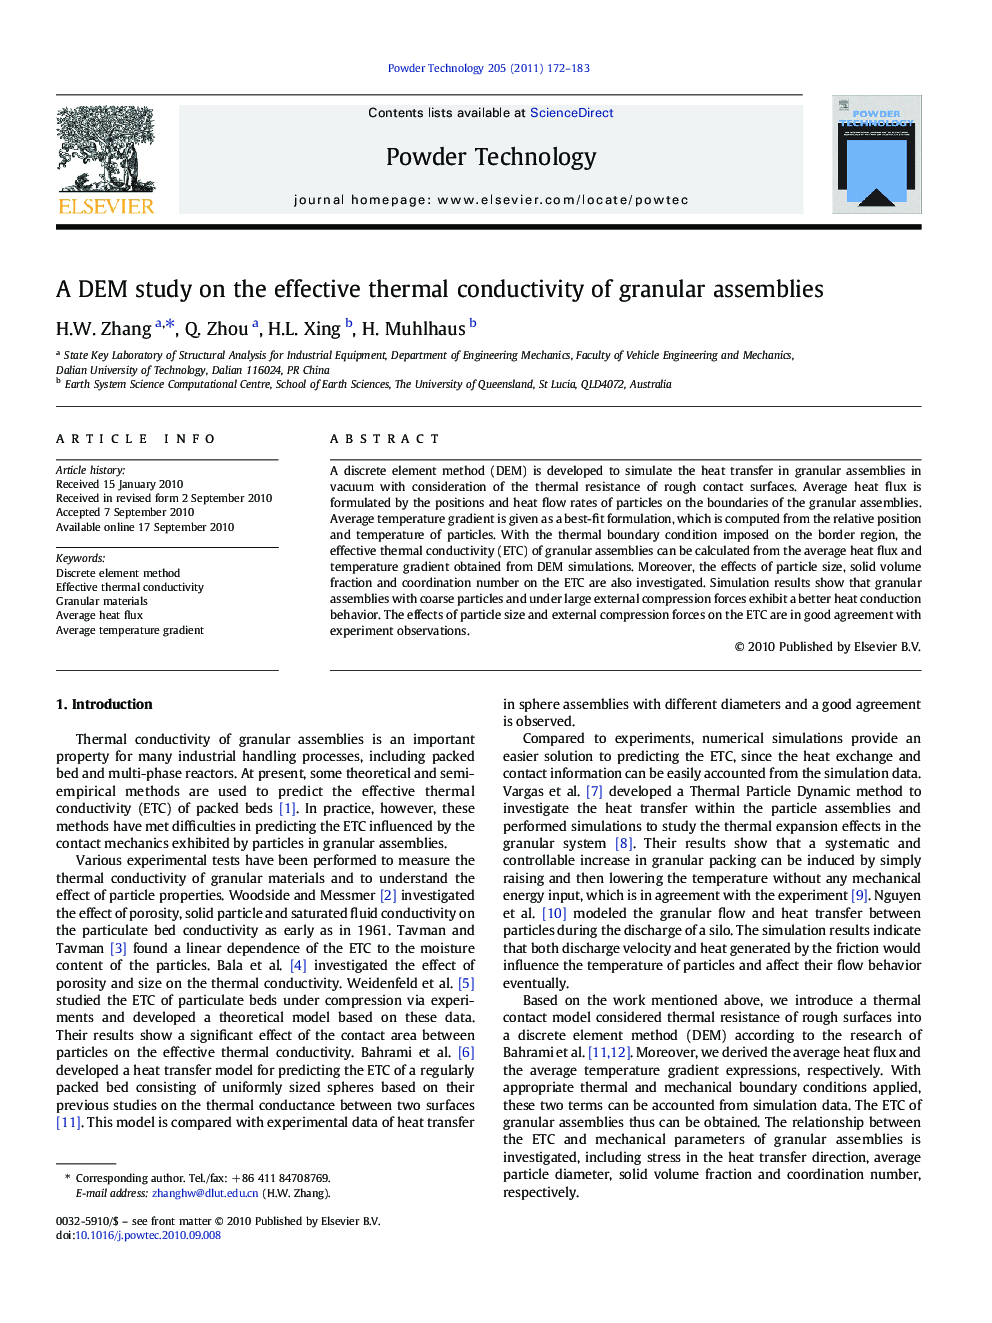 A DEM study on the effective thermal conductivity of granular assemblies